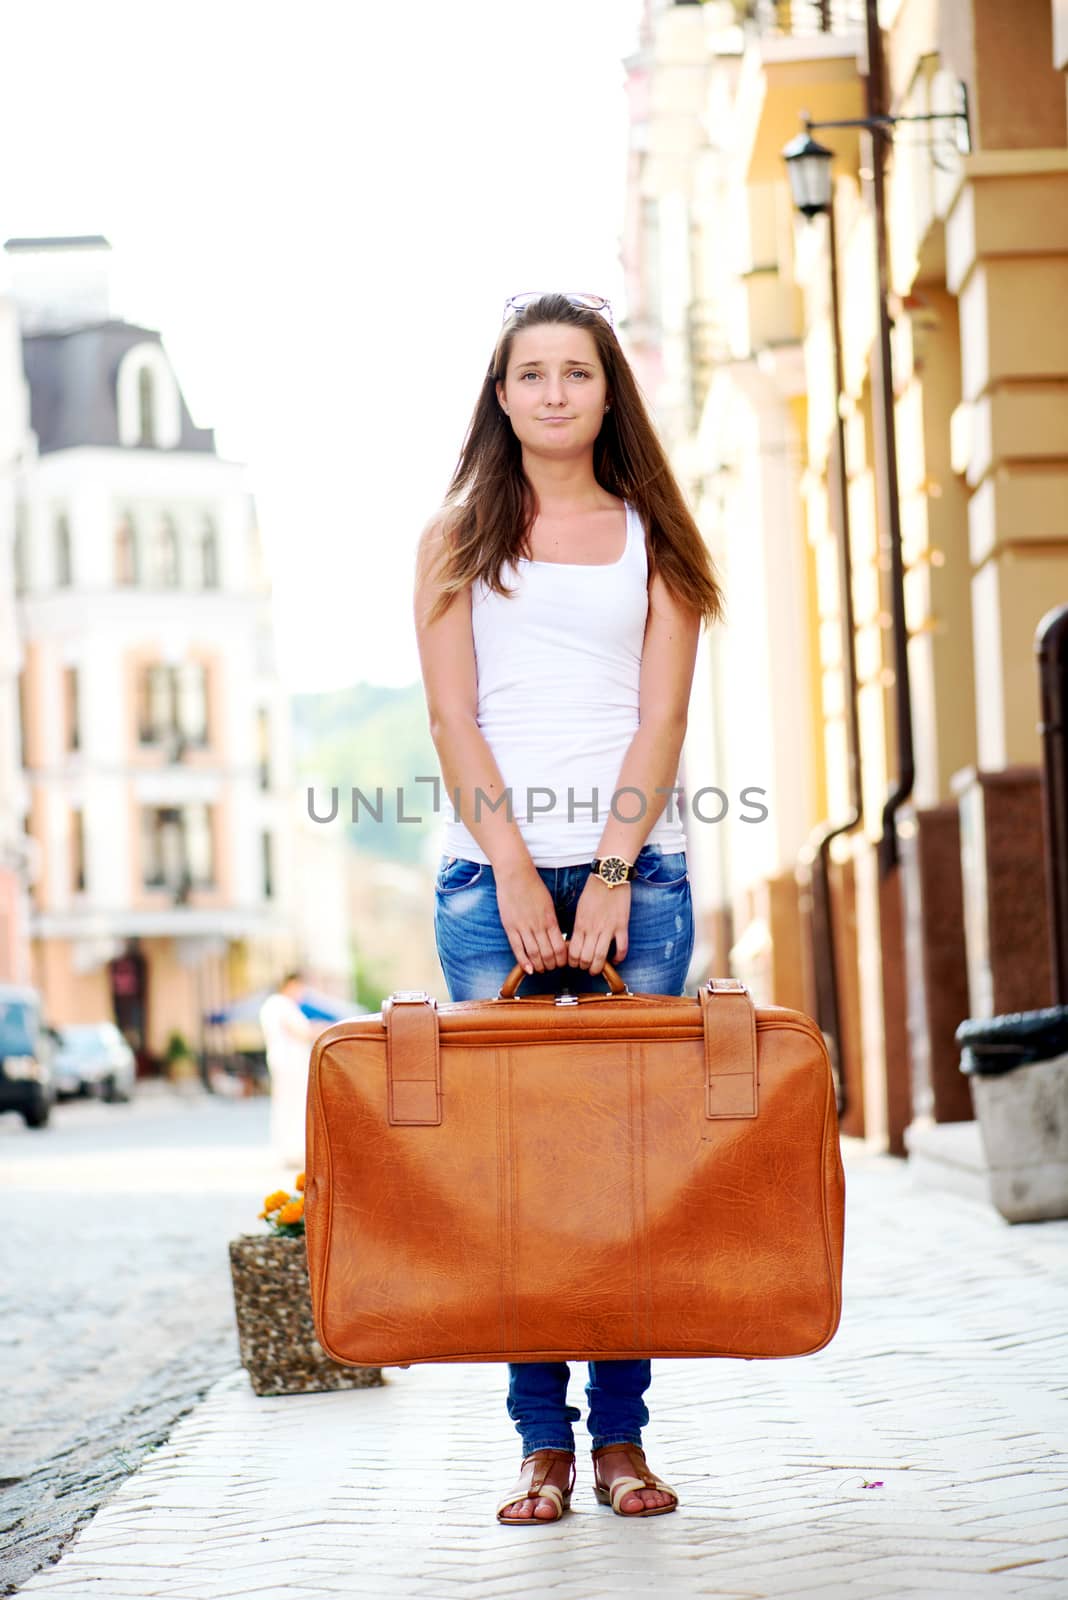 Sad looking girl with luggage in city by Nanisimova